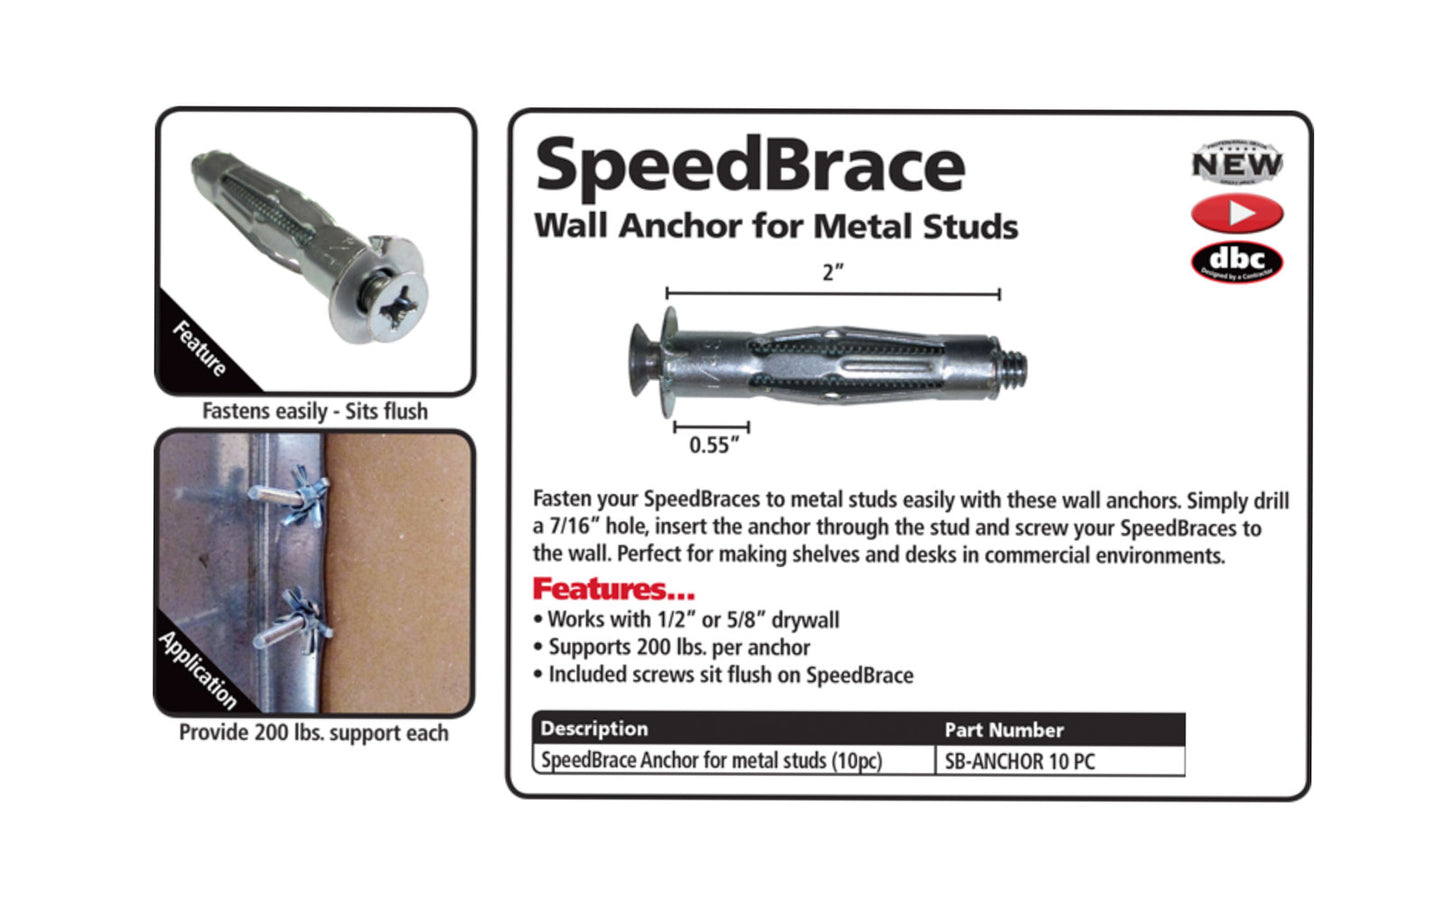 FaThe SpeedBrace Anchor is designed to be used with metal studs for a super strong hold when used with FastCap's SpeedBraces. Sold in a 10-Pack of SpeedBrace Anchors. 2" length anchor. Model SB-ANCHOR 10 PC. 663807099150